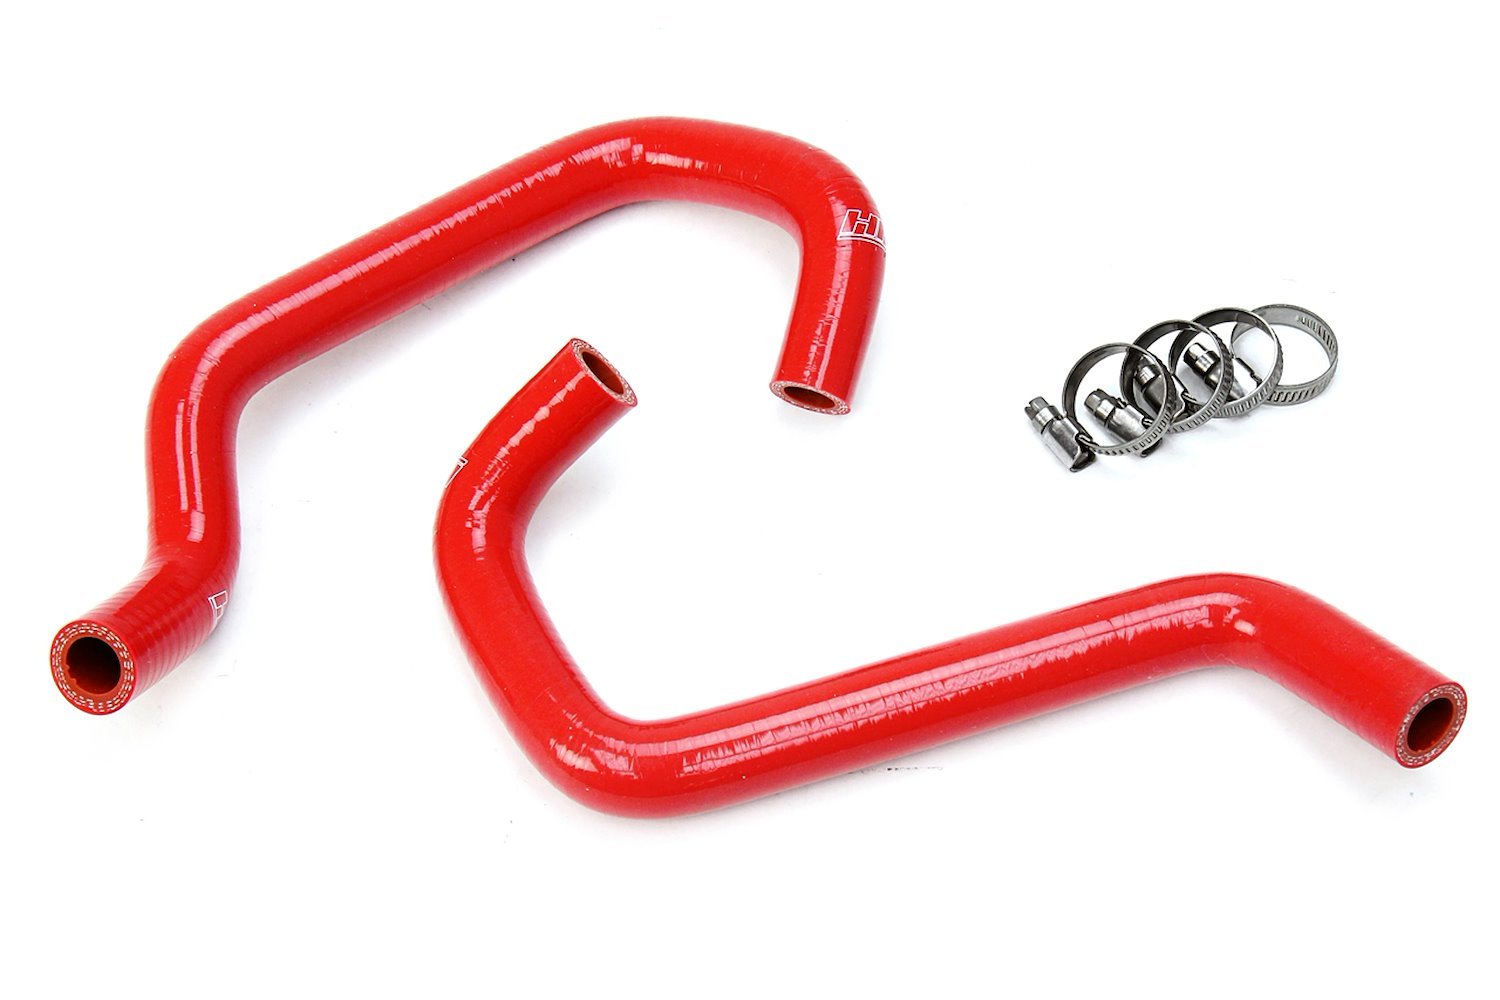 57-1701-RED Heater Hose Kit, High-Temp 3-Ply Reinforced Silicone, Replace OEM Rubber Heater Coolant Hoses